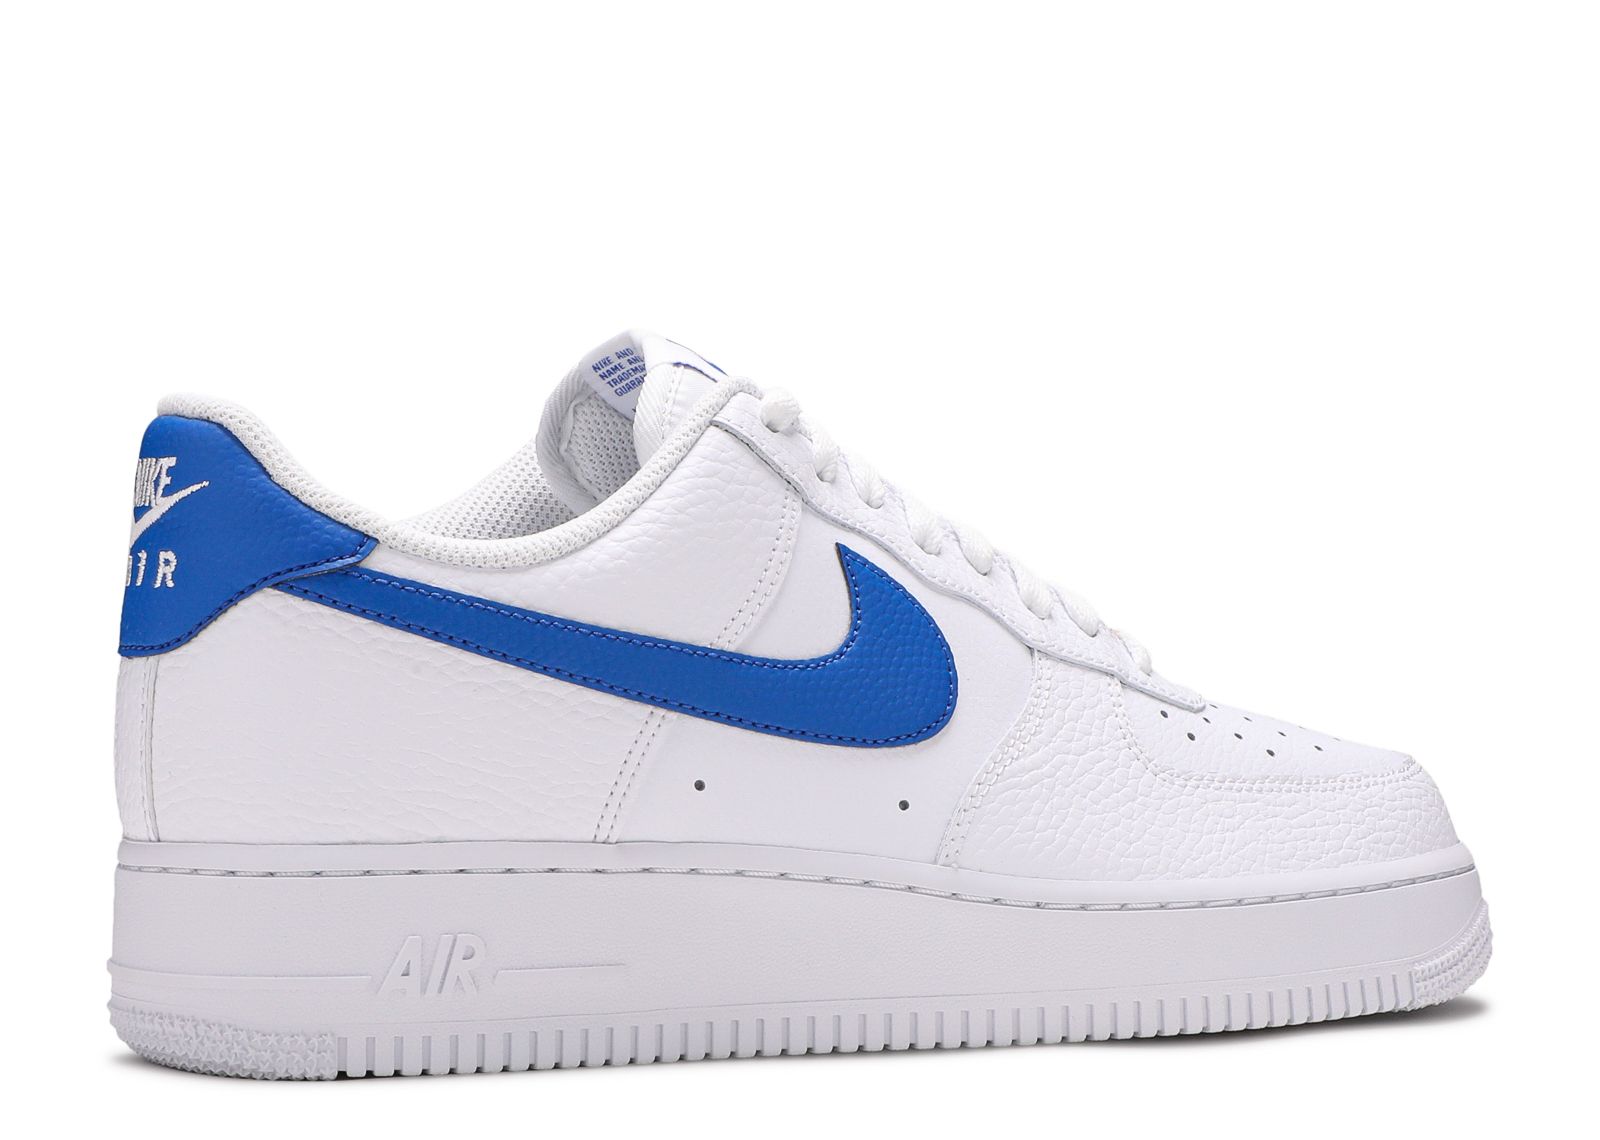 Nike Air Force 1 Low White Royal Blue - Men's - GBNY